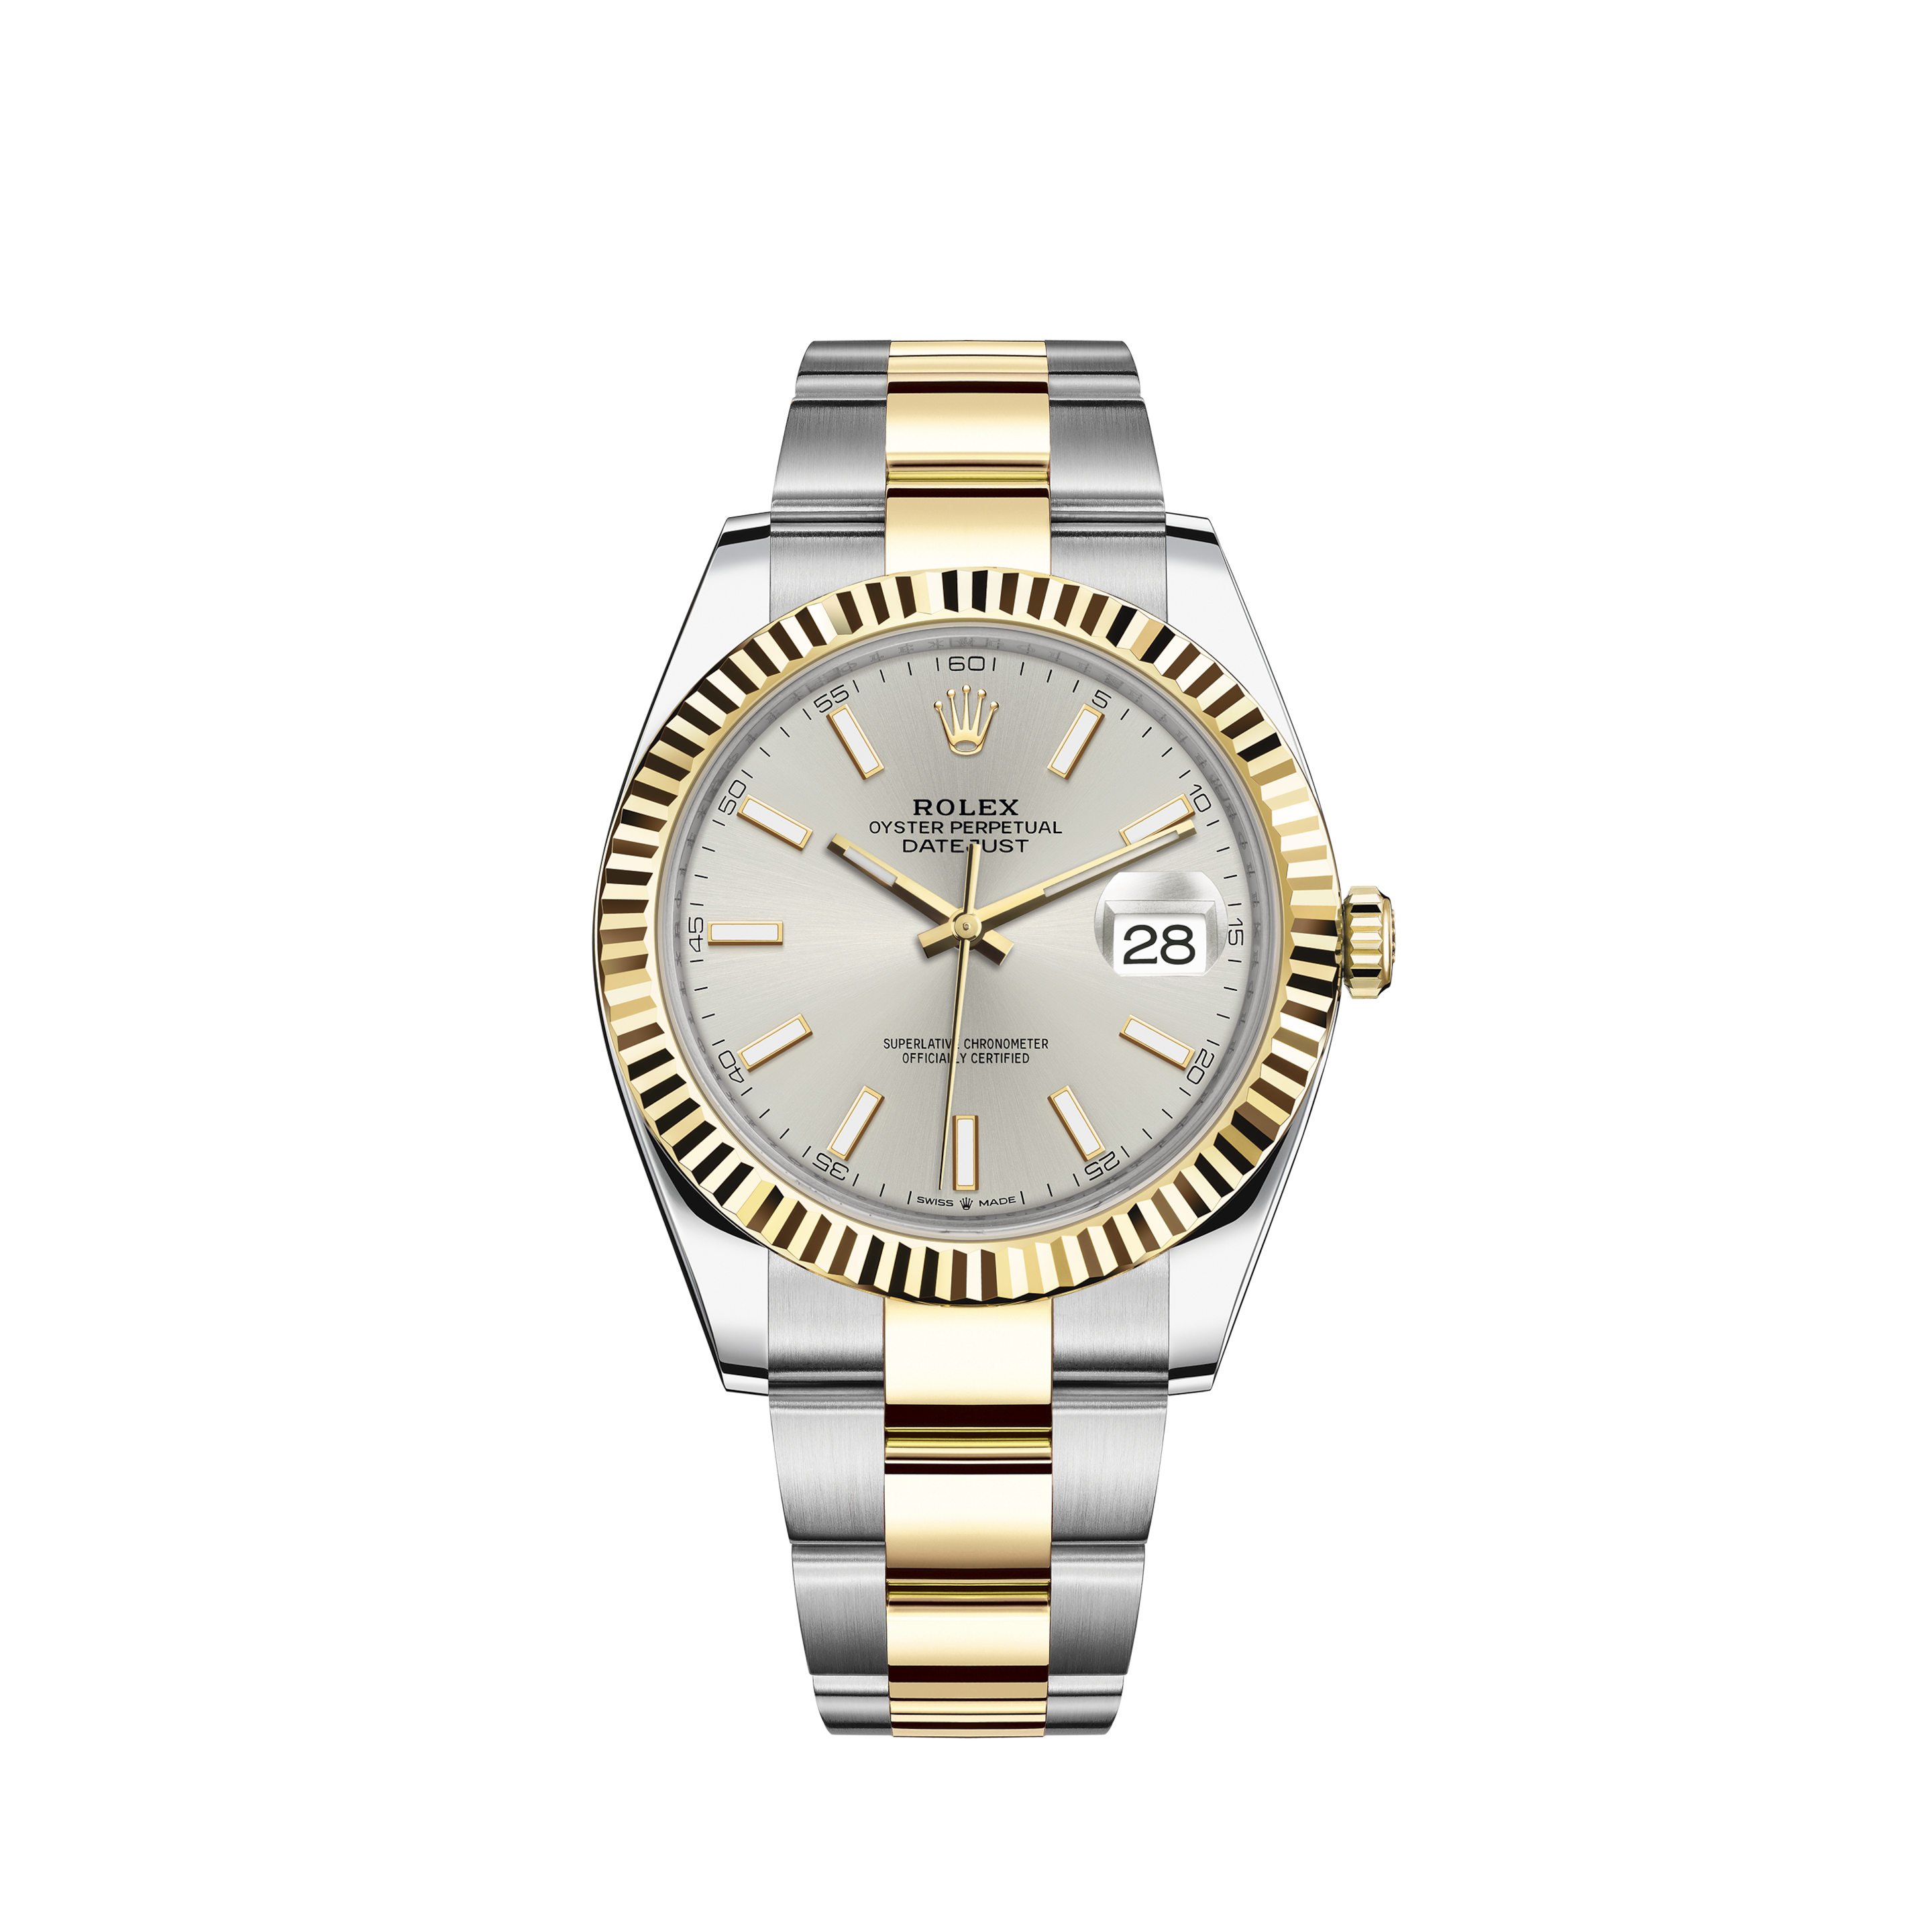 Rolex W/Box Papers Rolex Cellini Danaos Ladies 18K Gold Quartz Black Watch 6229/9bicRolex W/Papers Date 34 mm White Dial Two Tone Oyster Watch 15053 Circa 1987